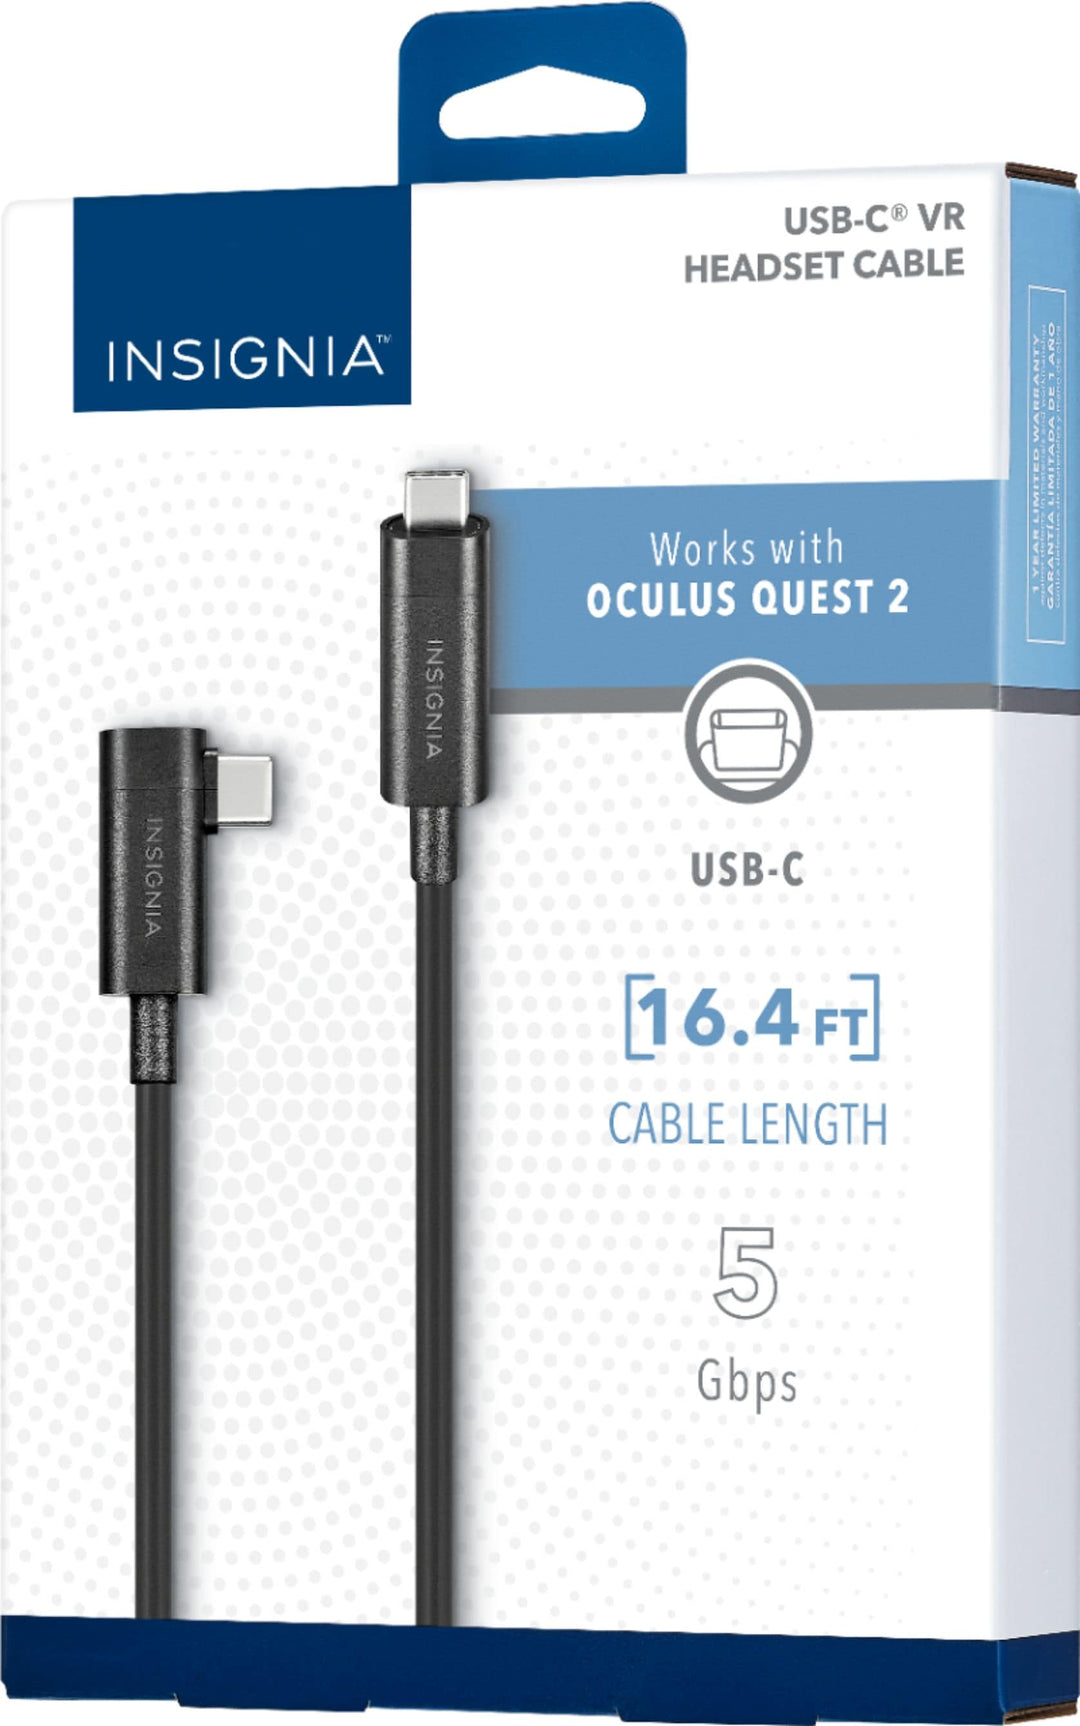 Insignia™ - 16.4' USB-C Virtual Reality Headset Cable for Meta Quest 2 and Meta Quest - Black_2